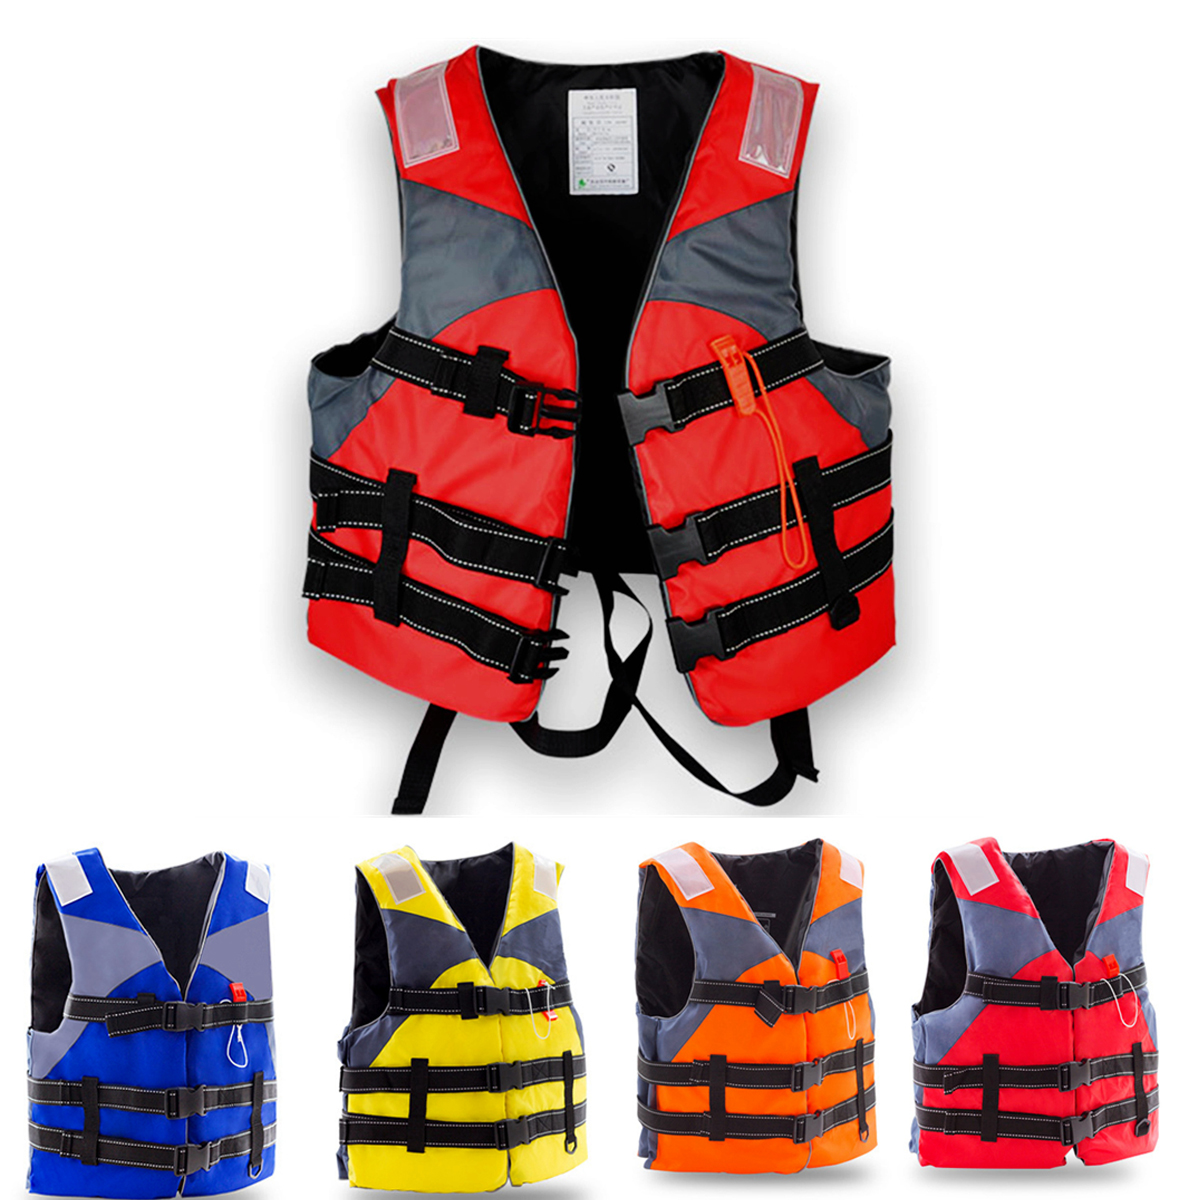 XXL-Outdoor-Survival-Life-Jacket-Fully-Enclose-Foam-Adult-Boating-Life-Jacket-Vest-with-Whistle-1512546-1